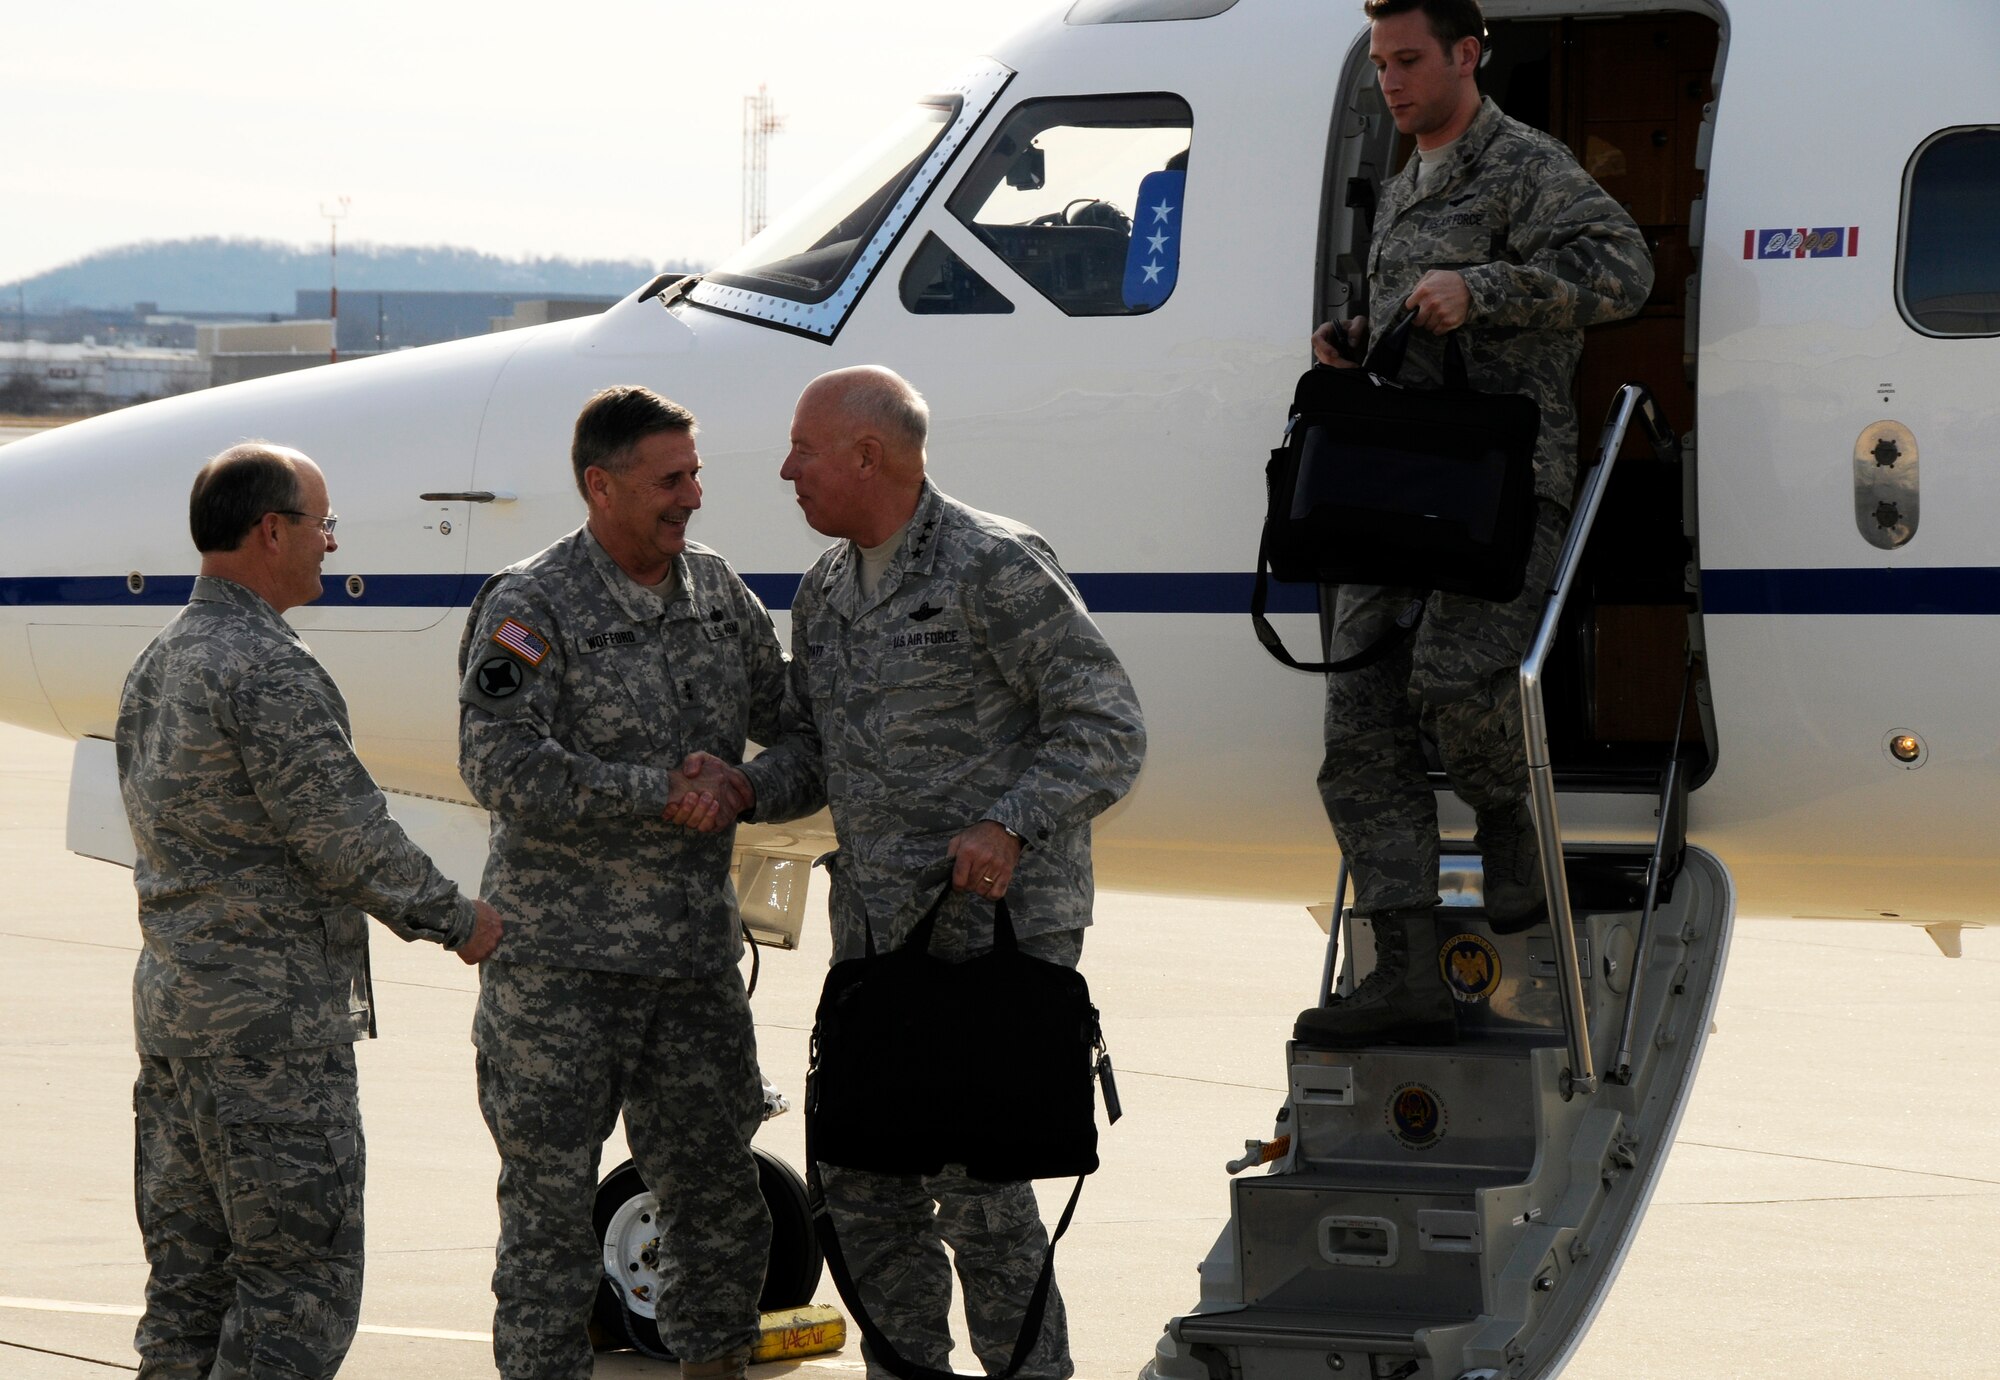 Lt. Gen. Harry M. Wyatt III, Director of the Air National Guard, middle, shakes hands with Maj. Gen. William Wofford, Arkansas National Guard adjutant general, as Brig. Gen. Dwight Balch, Arkansas Air National Guard commander, left, looks on. Wyatt visited the 188th Fighter Wing Jan. 18 and met with 188th leaders and officials with the City of Fort Smith. Wyatt also was able to gauge the 188th’s capabilities and assets during a helicopter flight over Ebbing Air National Guard Base and Fort Chaffee Maneuver Training Center, where the 188th’s Detachment 1 Razorback Range is located. Wyatt was able to observe an exercise at Razorback Range involving the 188th’s A-10C Thunderbolt II “Warthogs” and the 188th Security Forces Squadron. (National Guard photo by Tech Sgt. Josh Jones/188th Fighter Wing Public Affairs)